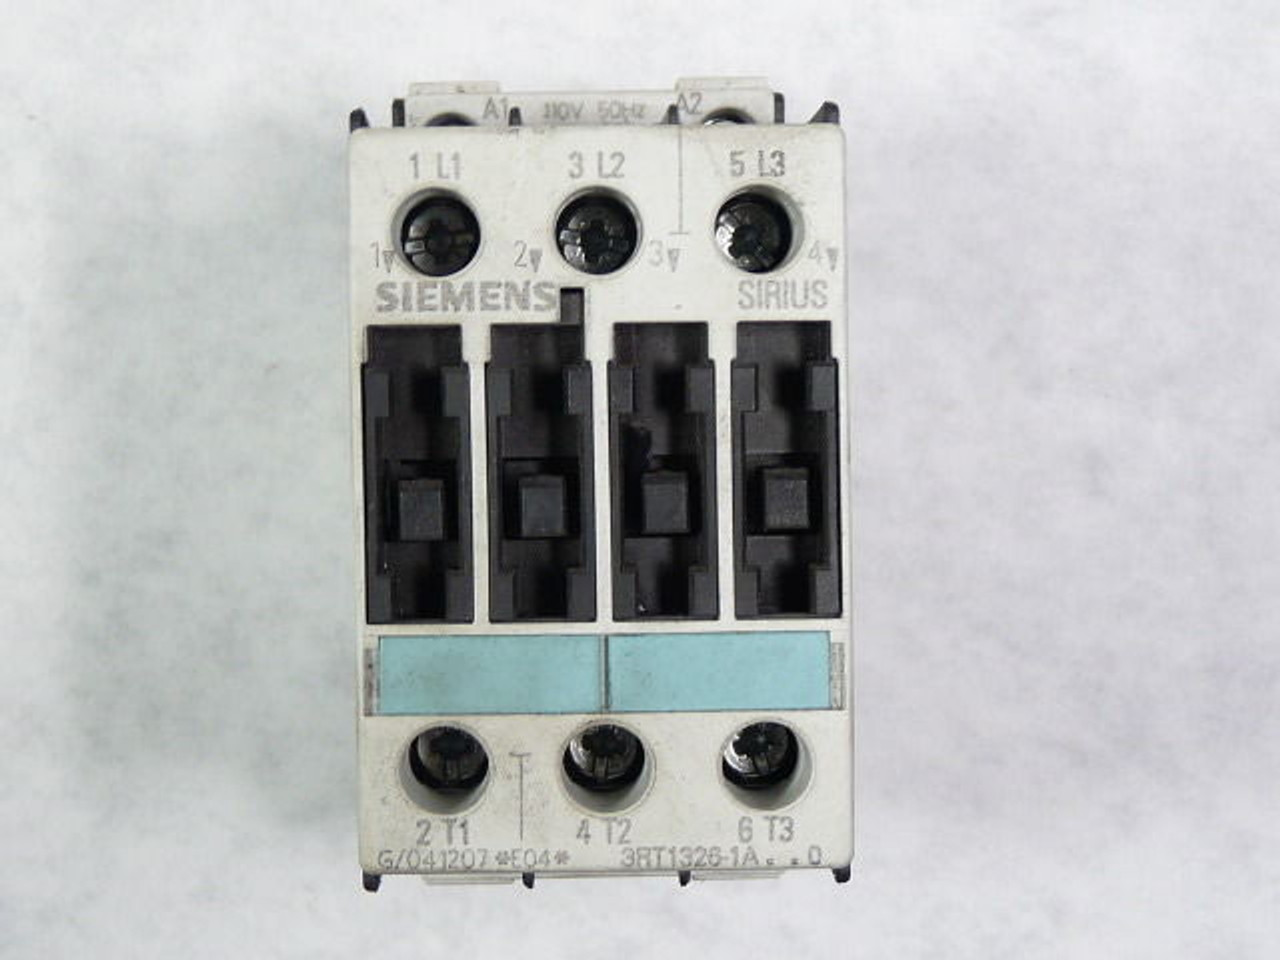 Siemens 3RT1326-1AK60 Magnetic Contactor 4P 40A 110V/50Hz 120V/60Hz USED